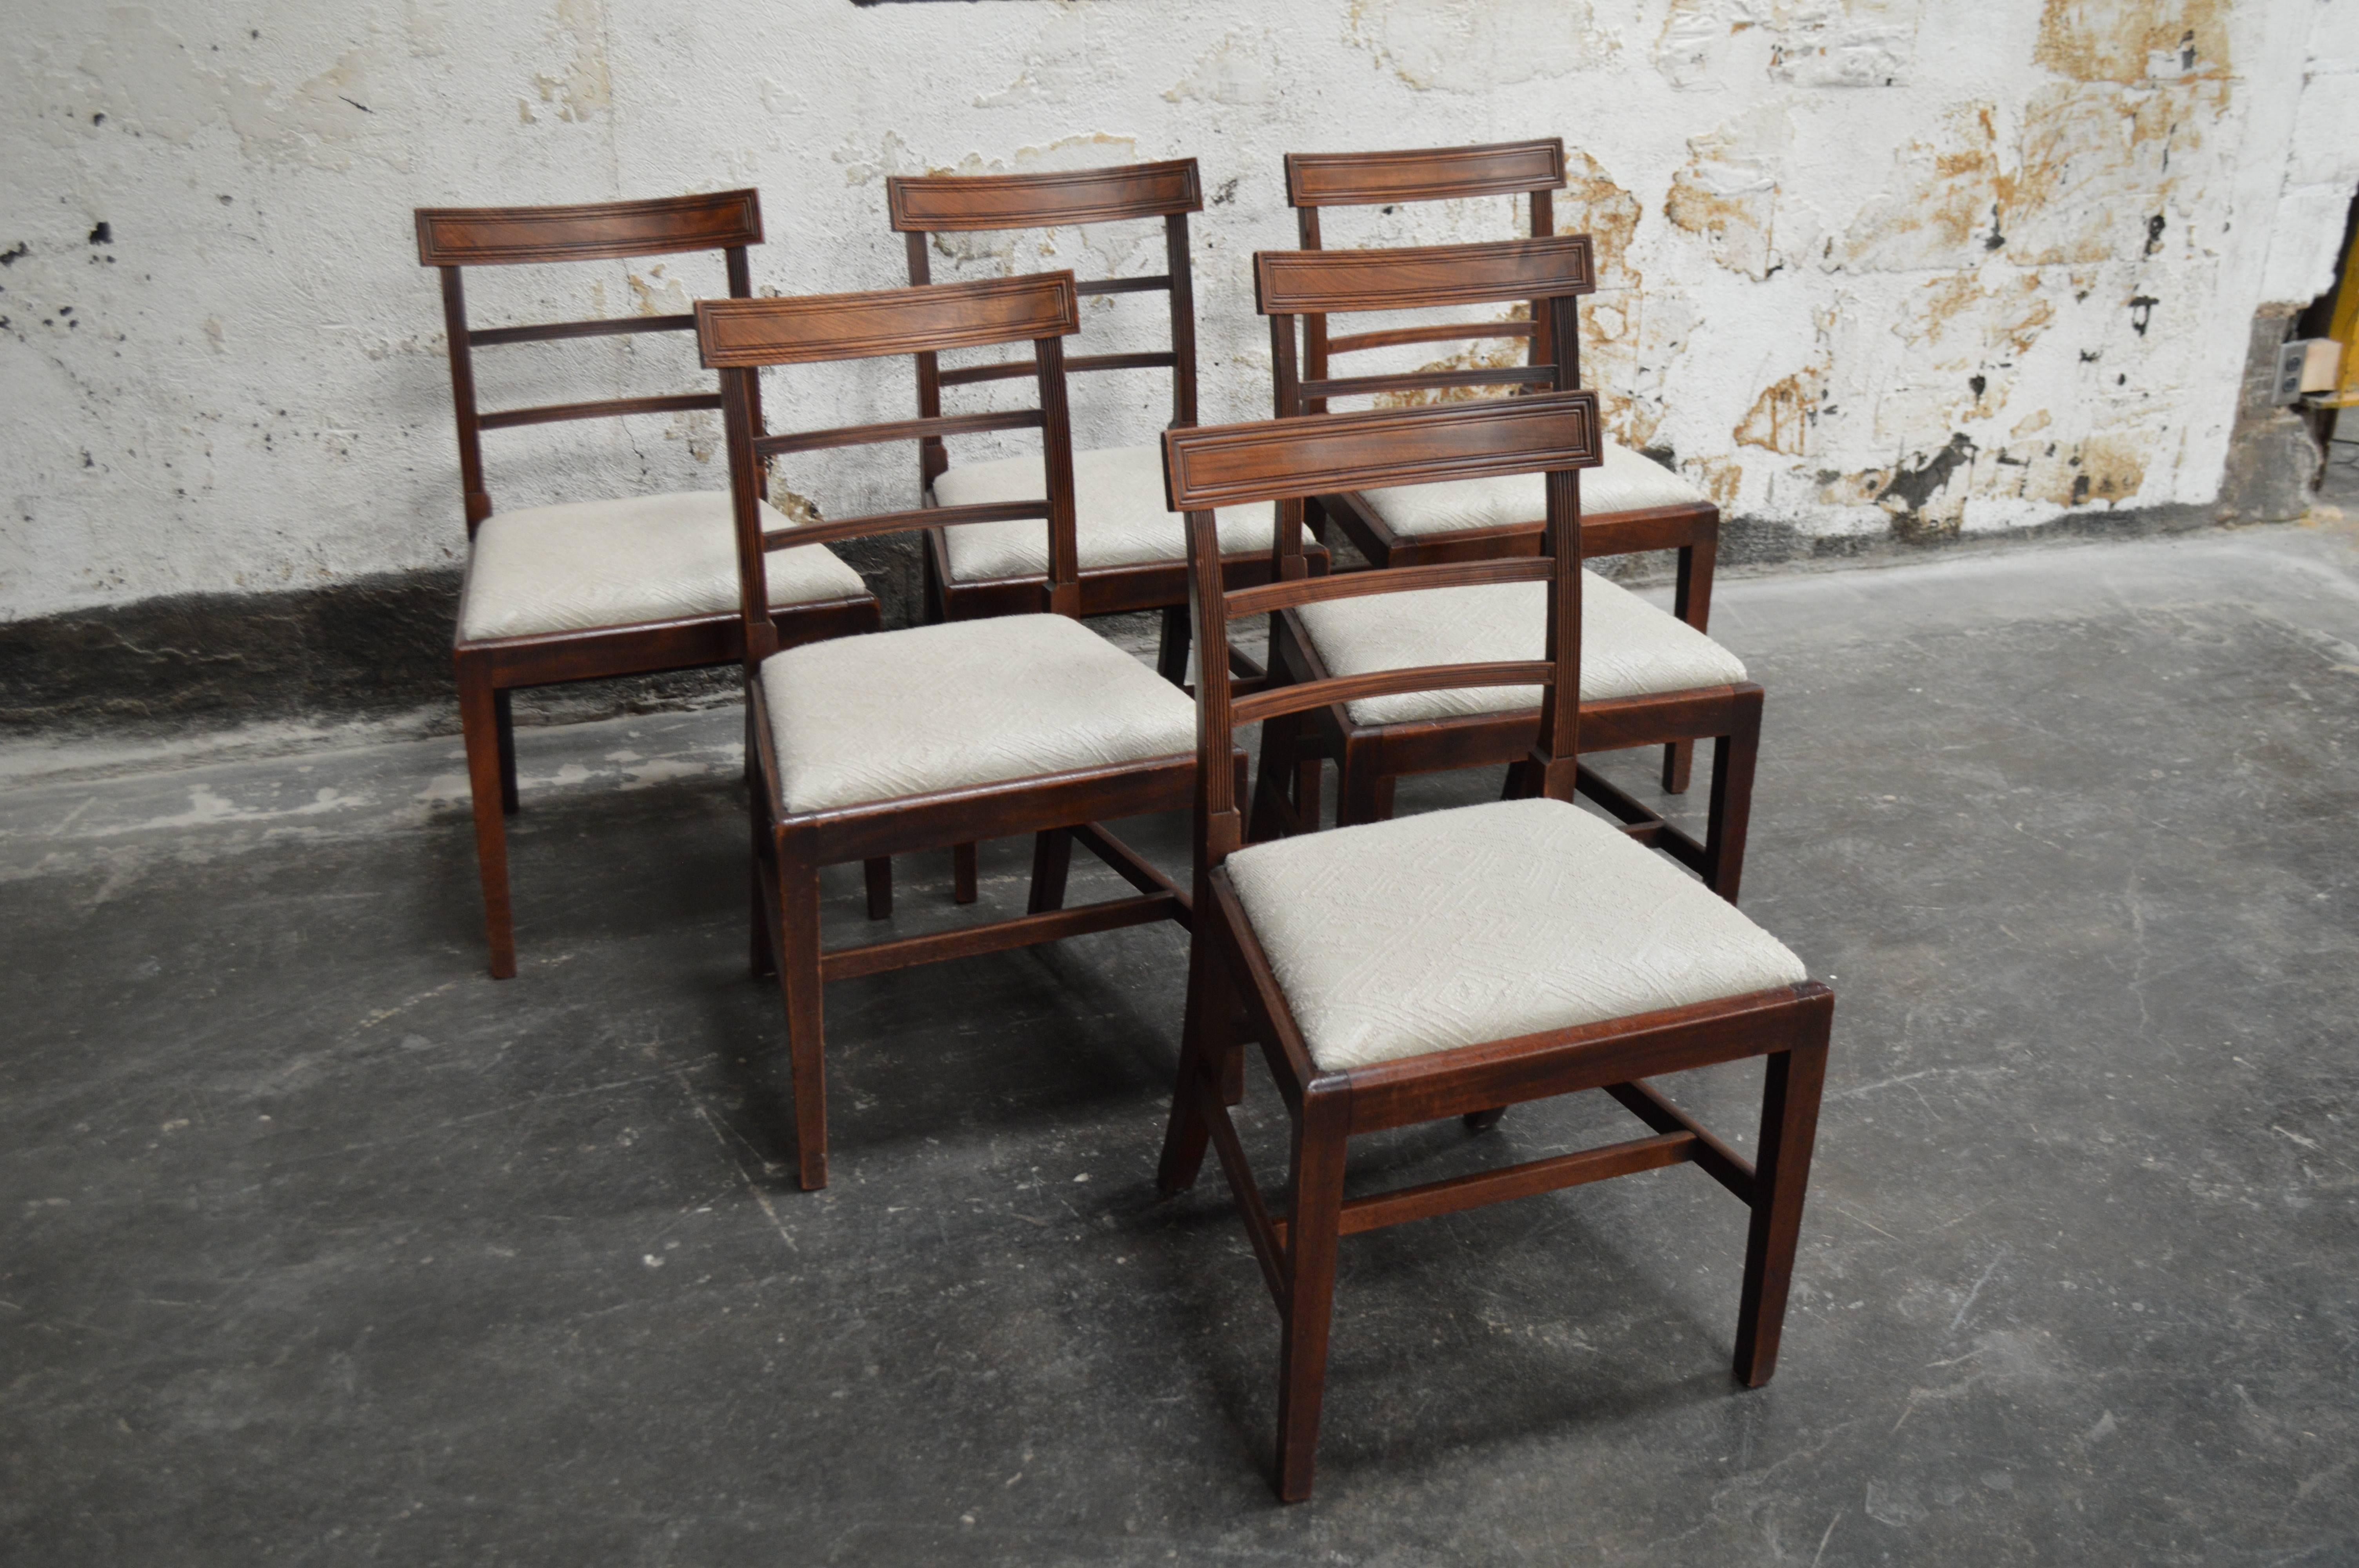 Handsome tailored set of six Art Deco dining chairs crafted of mahogany. Newly upholstered in neutral patterned bouclé fabric. Slightly curved back with routed stretcher detail. Comfortable proportions for modern day dining room.